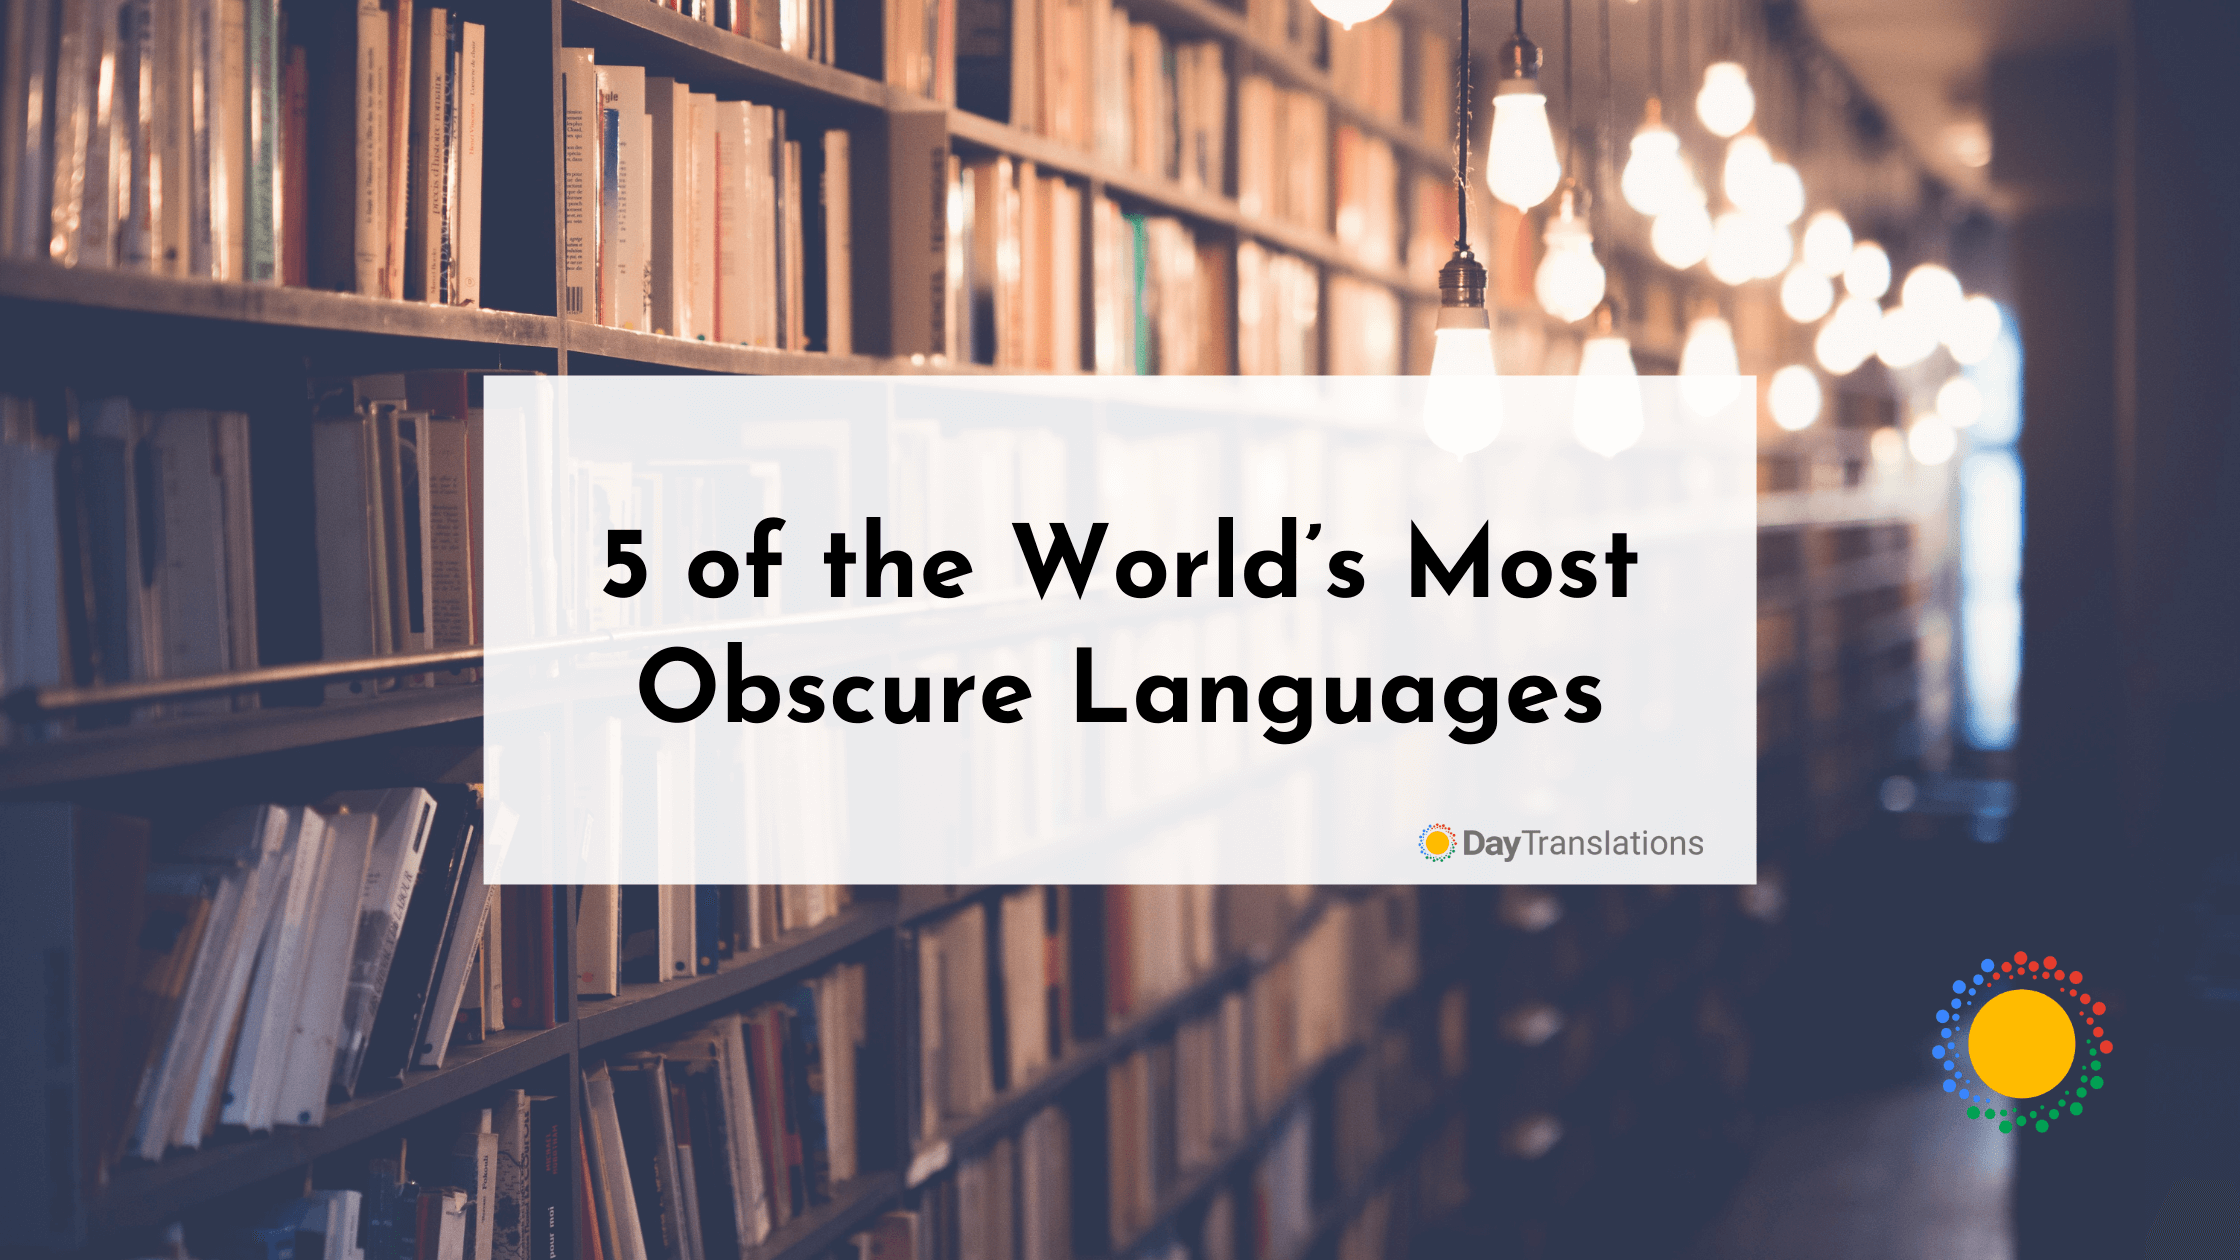 5 of the World’s Most Obscure Languages